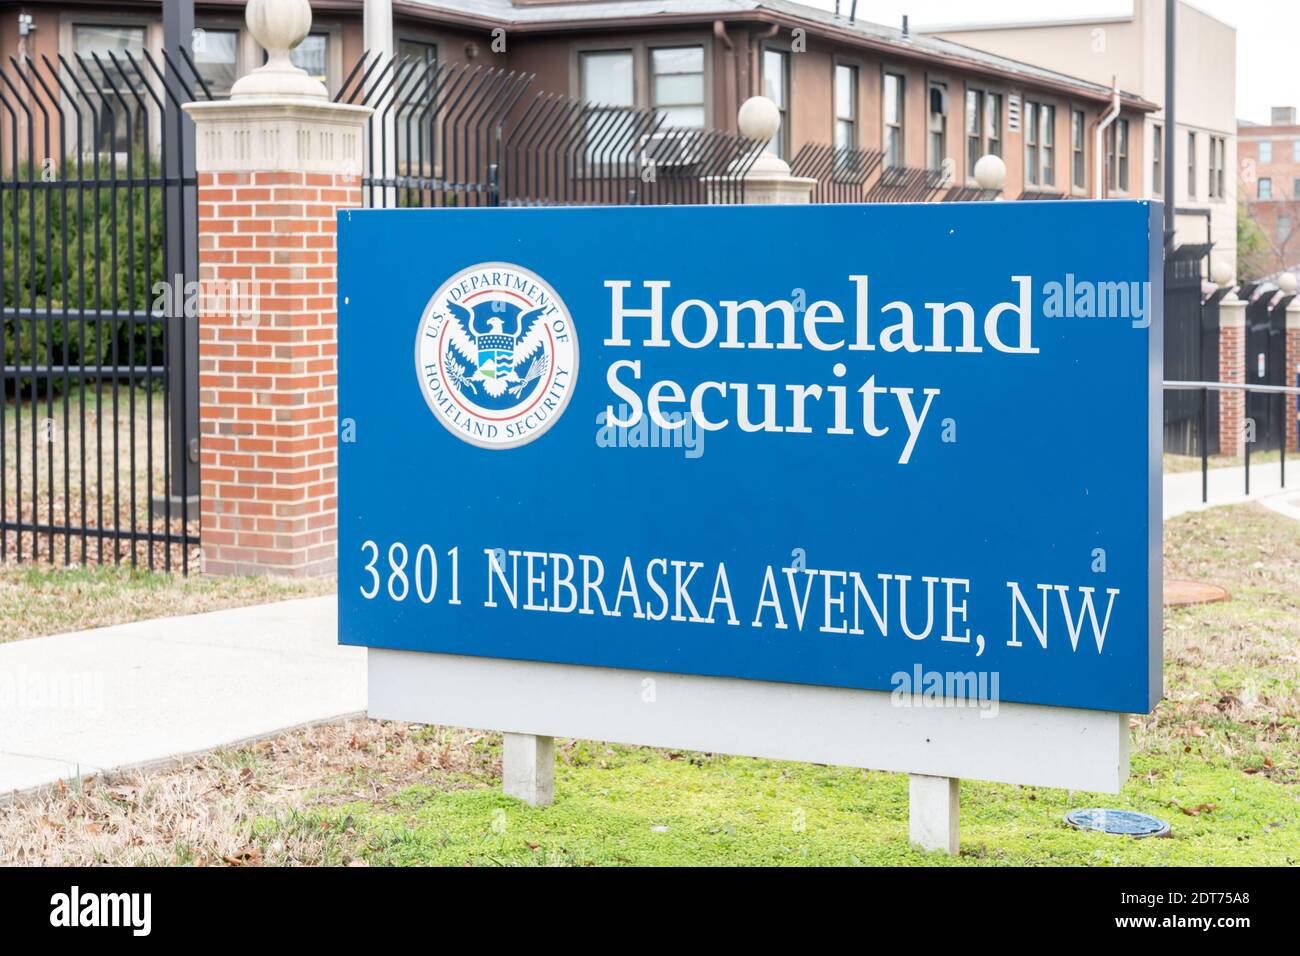 Homeland Security (DHS) sign in Washington, D.C. USA. Stock Photo